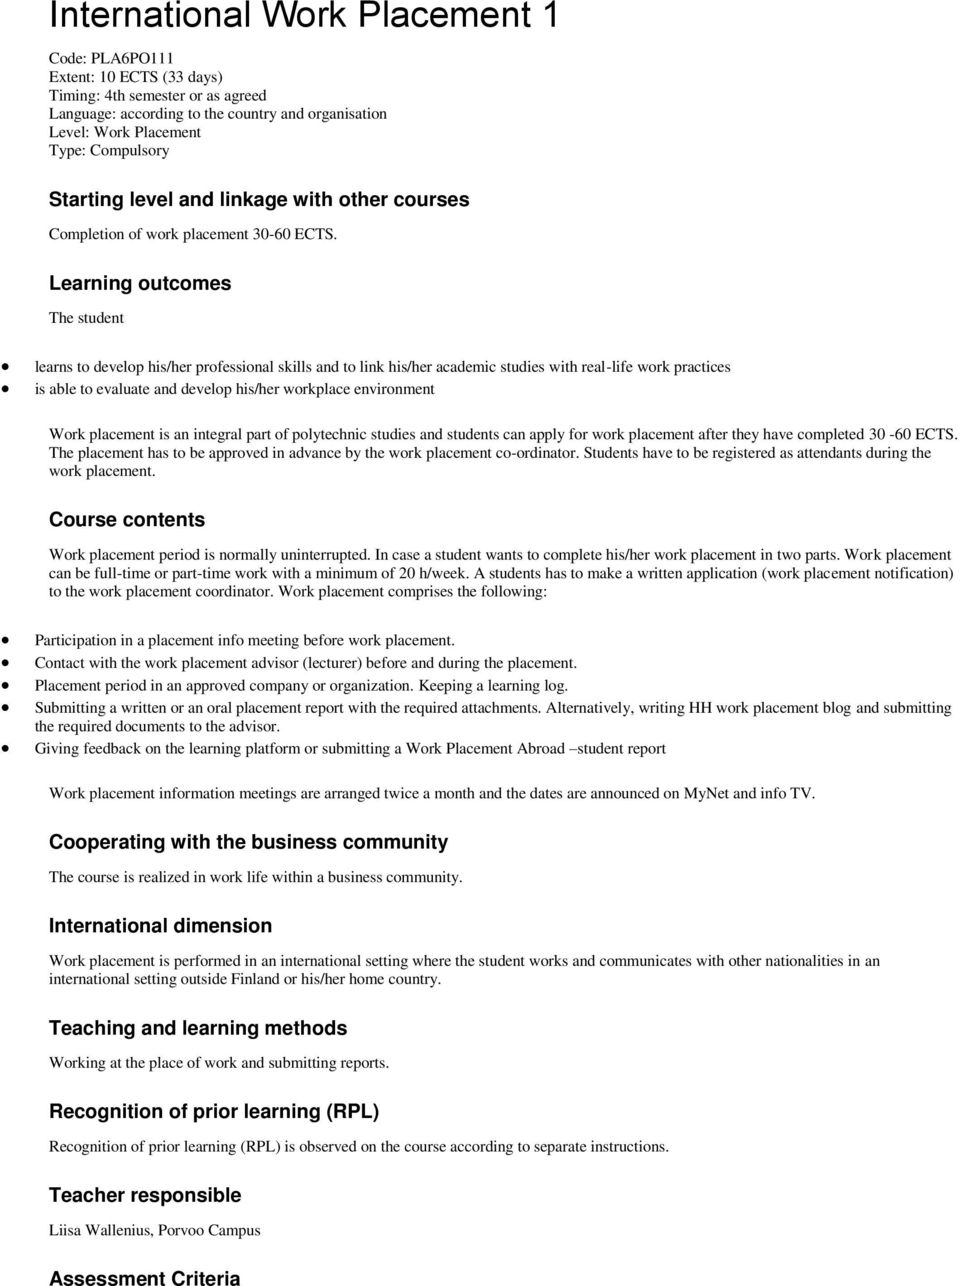 Learning outcomes The student learns to develop his/her professional skills and to link his/her academic studies with real-life work practices is able to evaluate and develop his/her workplace